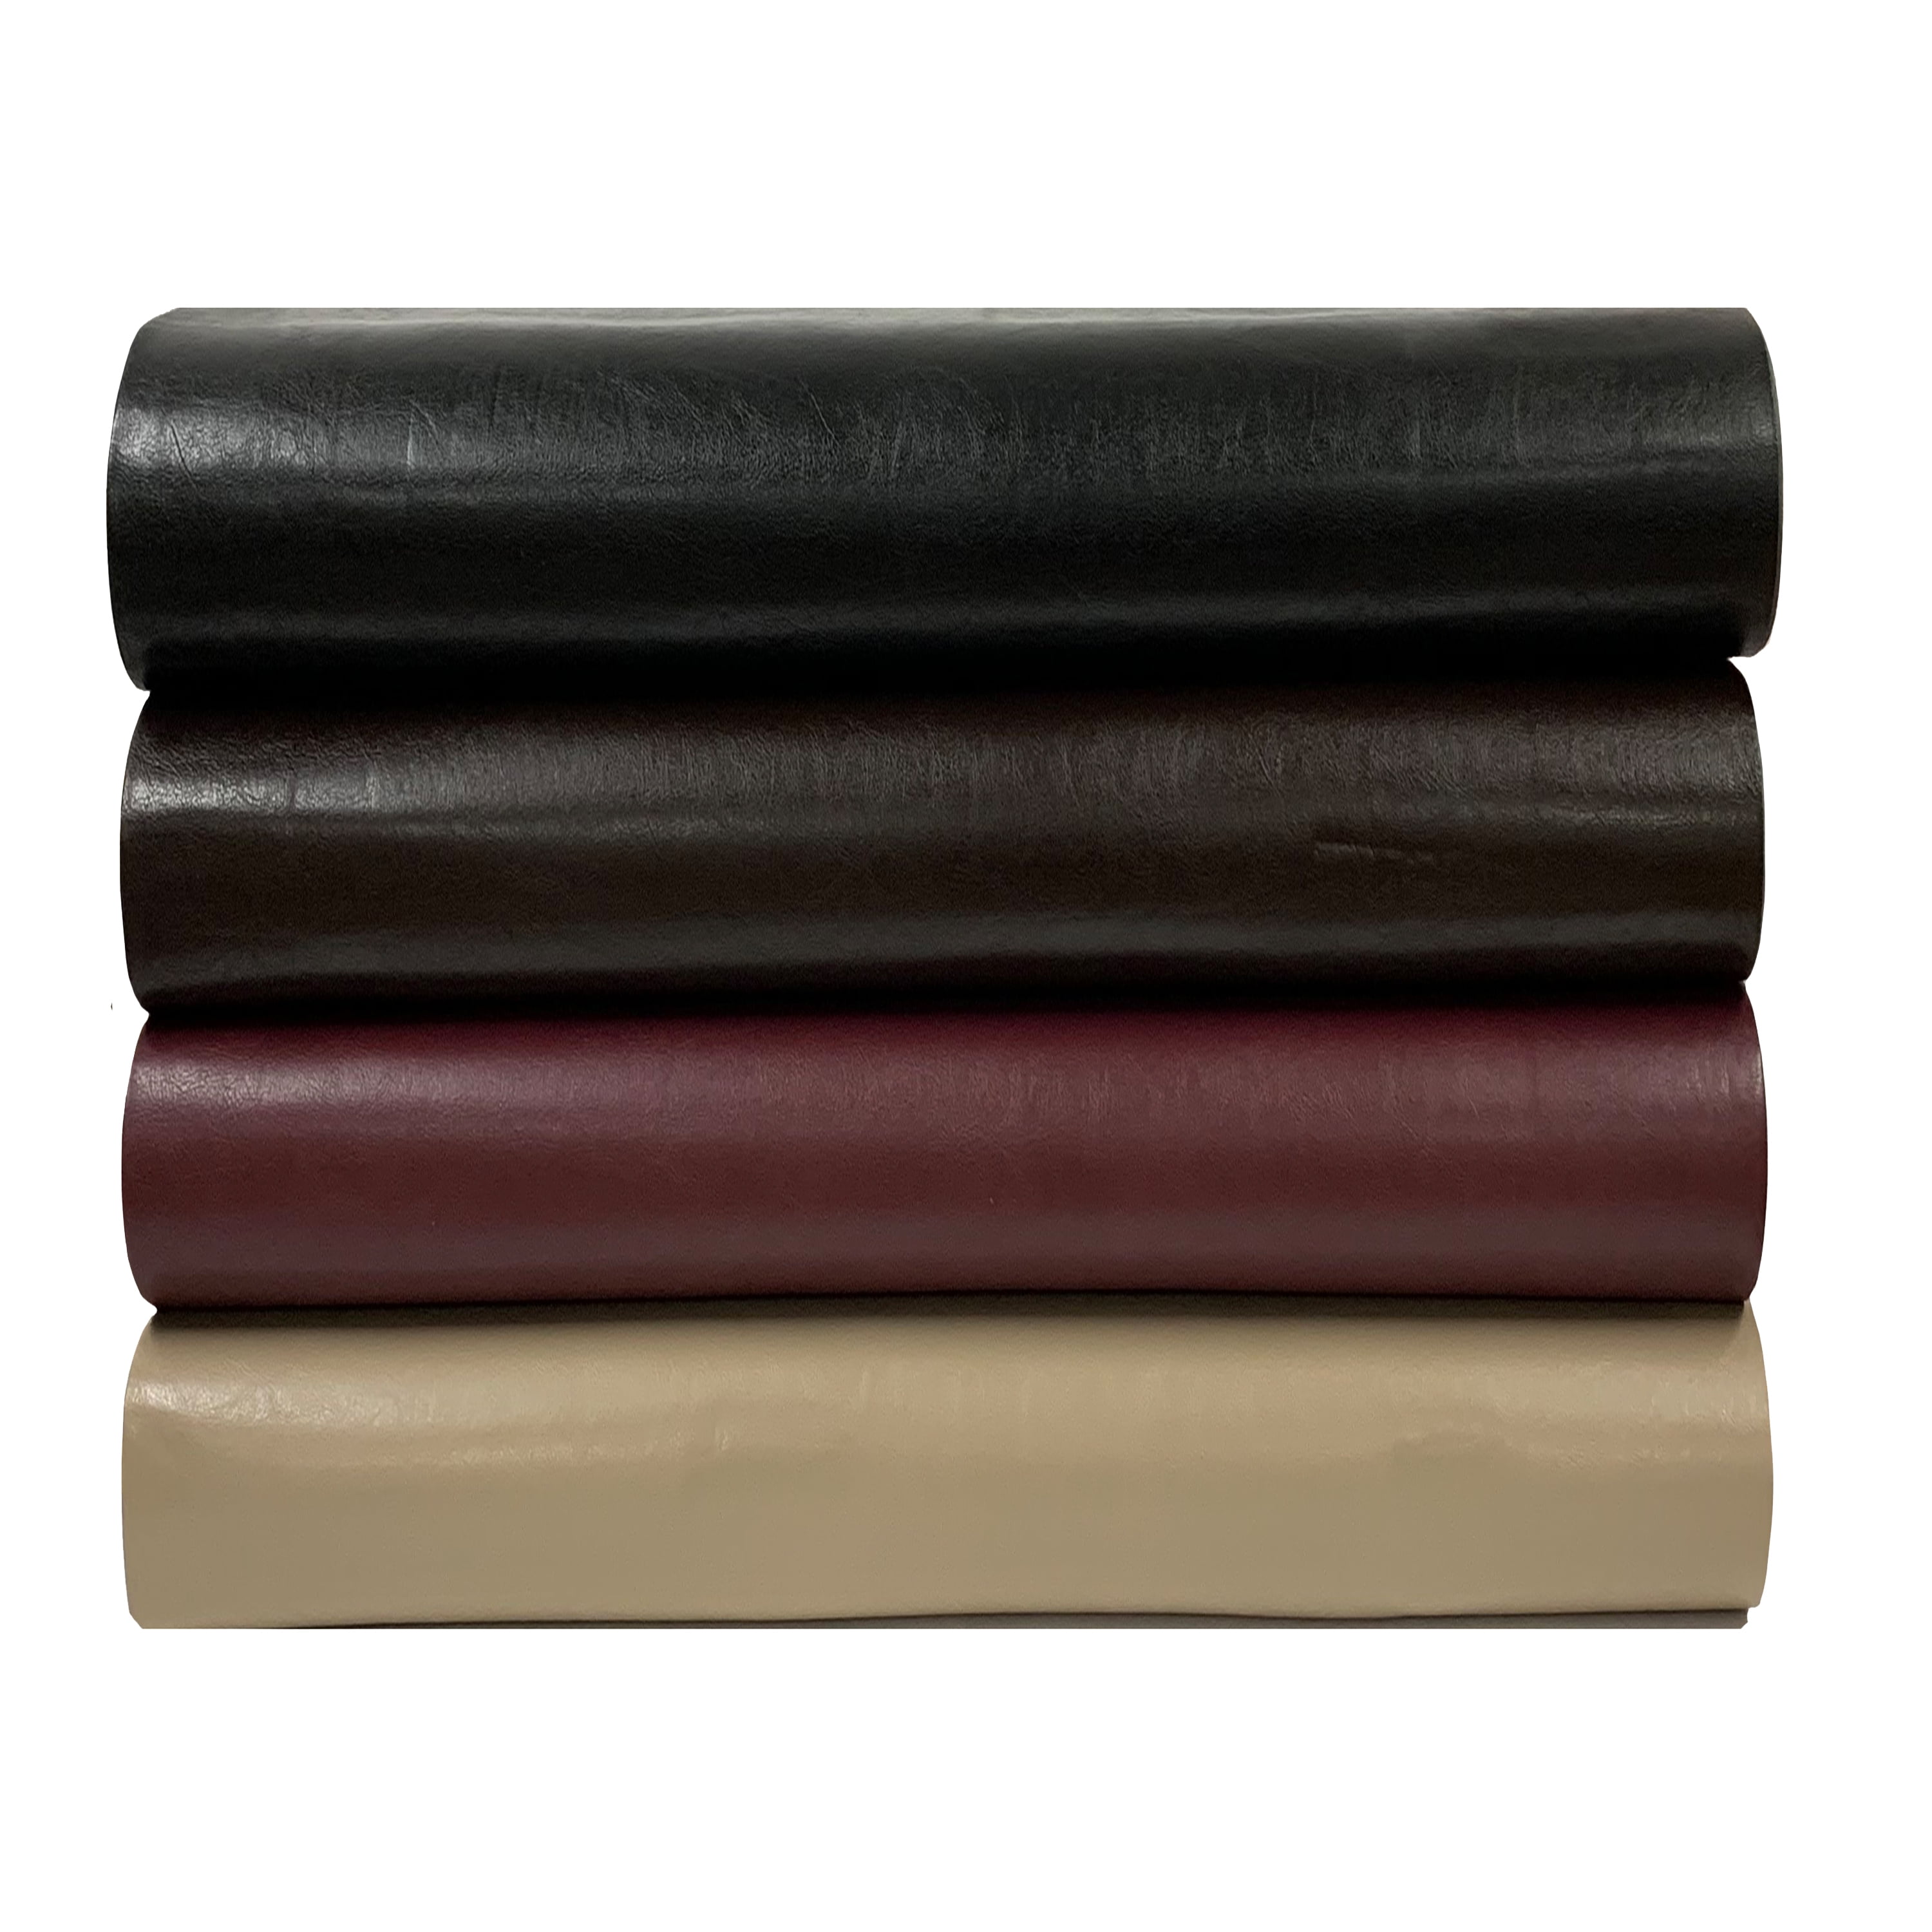 Shason Textile Faux Leather Upholstery, Leather Upholstery Fabric